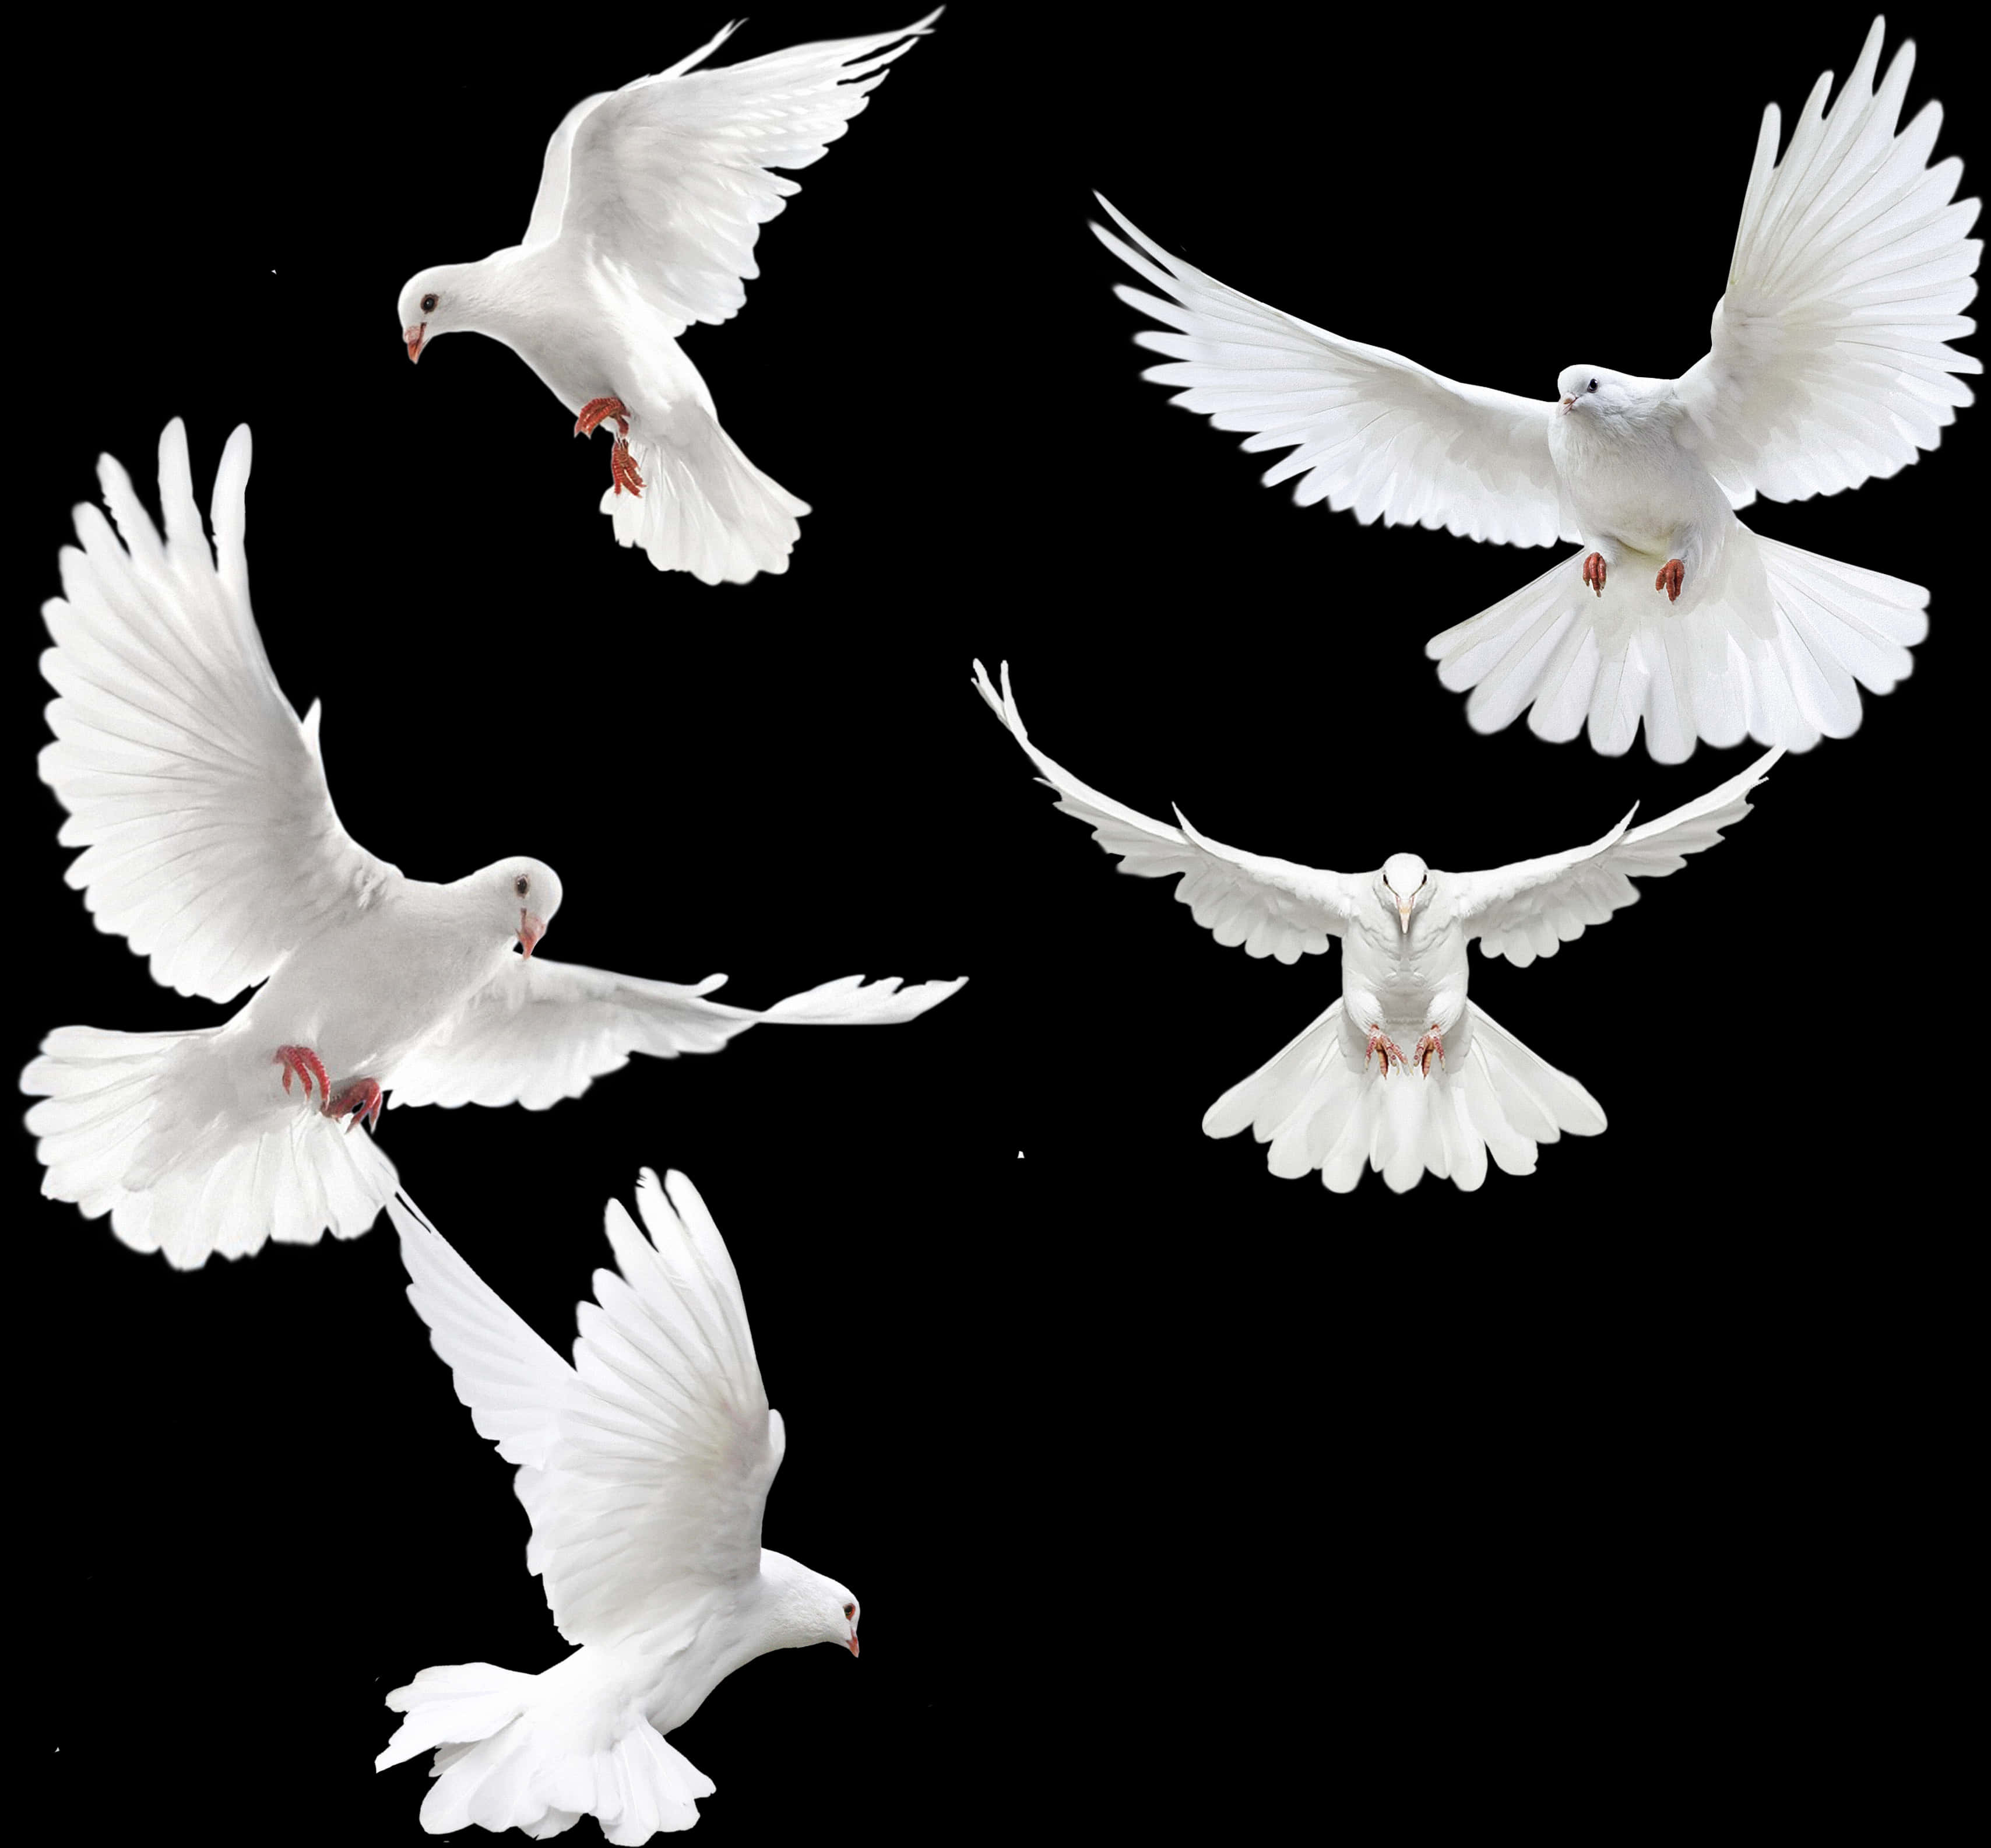 A Group Of White Doves Flying